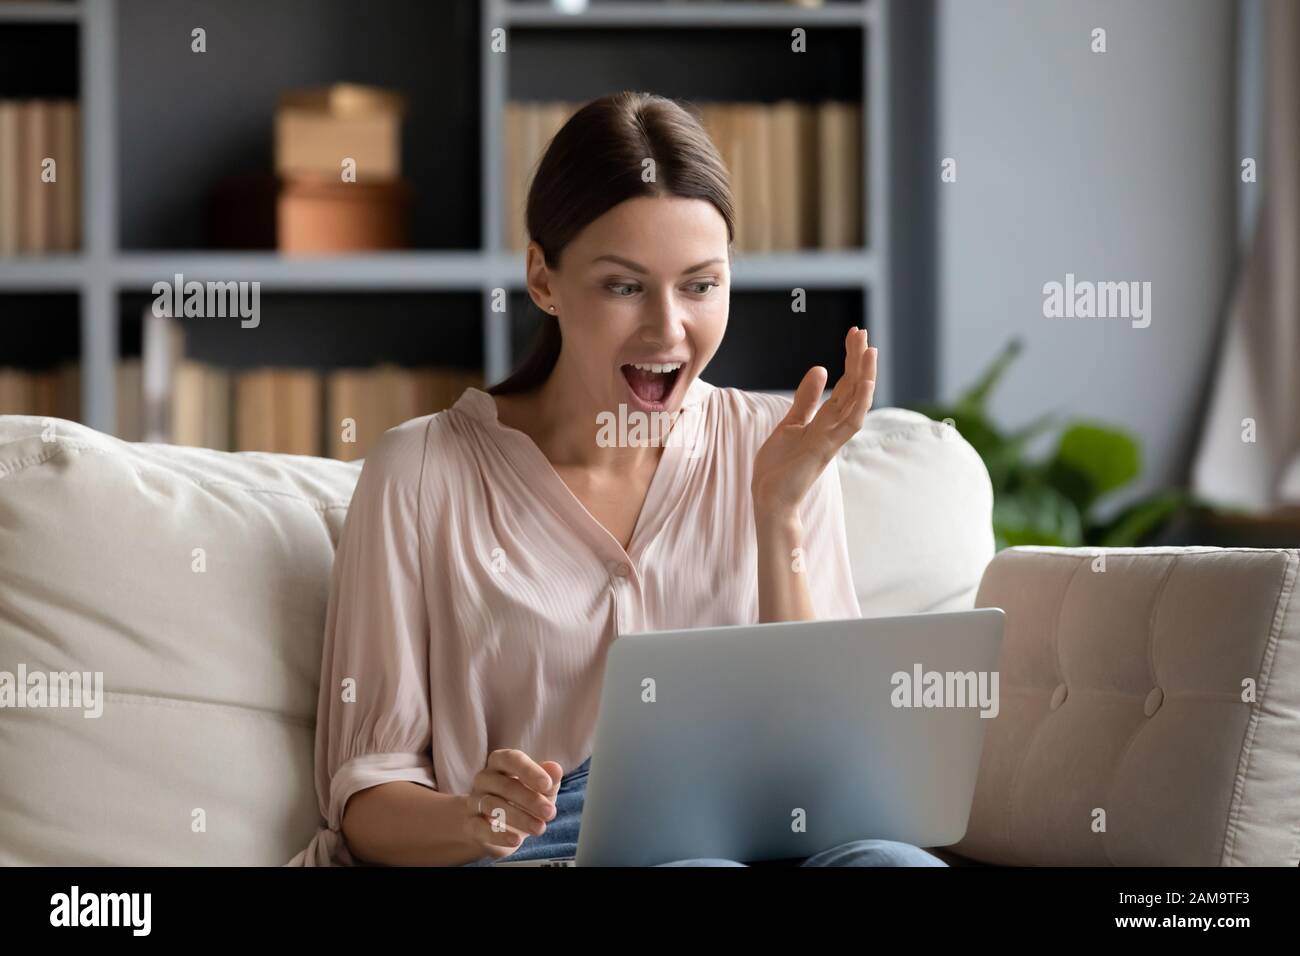 Excited millennial girl shocked by news on laptop Stock Photo